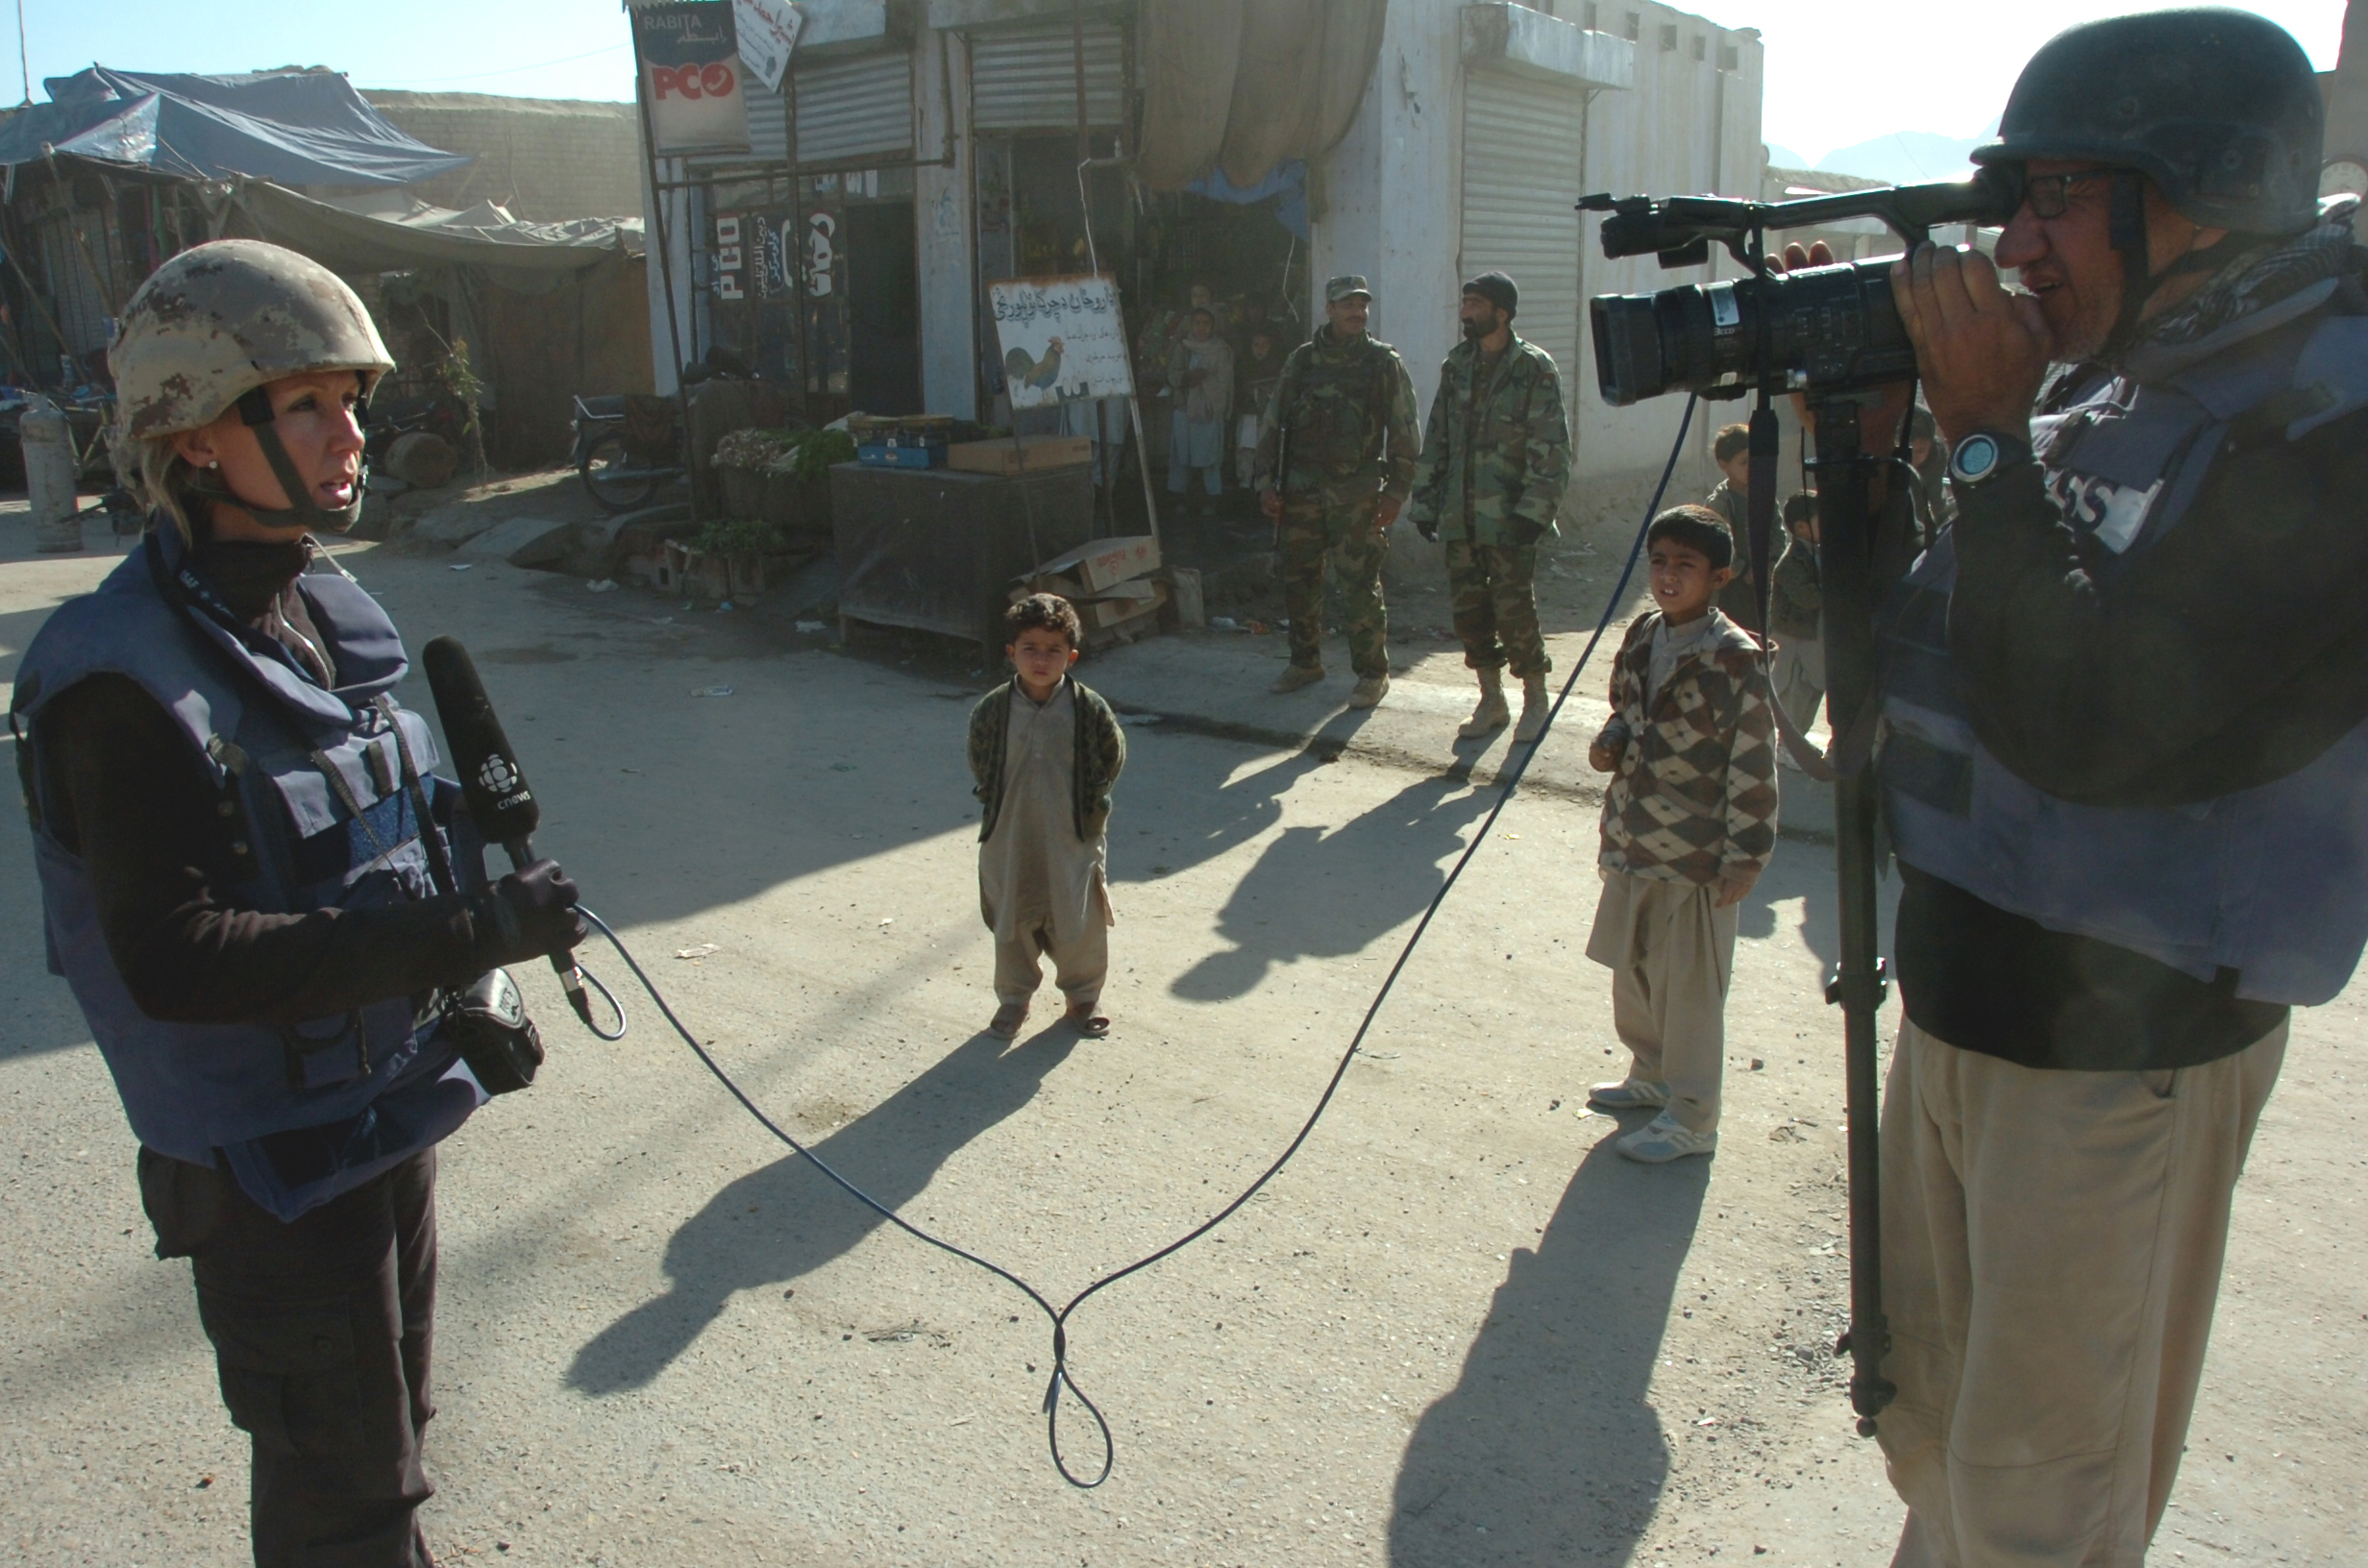 English/Anglais AR2006-S002-0048 December 19, 2006  Kandahar, Afghanistan Reporter Laurie Graham and Cameraman Al Lawrence of the Canadian Broadcasting Corporation (CBC) do an 'on camera' on the main street of Bazaar-e-Panjwaii while two local boys watch with fascination.  CBC joined a Civilian Military Cooperation (CIMIC) Patrol through the streets of Bazaar-e-Panjwaii.  The patrol originated at the gates of Forward Operating Base Ma’Sum Ghar and ended two kilometers east at an Afghan National Army Checkpoint.  Its purpose was to gauge the mood of the town and to do quick assessments of the population.  Joint Task Force Afghanistan (JTF-Afg) is Canada’s contribution to NATO’s International Security Assistance Force (ISAF) in Afghanistan. The focus of this mission is to help Afghans rebuild their lives, families, communities and nation.  Canadian Forces personnel in Afghanistan are working to improve the quality of life of Afghans by providing a more secure environment in which Afghan society can recover from more than 25 years of conflict. The Canadian Forces (CF) contribution in Afghanistan comprises about 2,500 soldiers, most of who serve in Kandahar province with a smaller number of personnel assigned to Kabul, various military headquarters, and civilian organizations.  Photo By:  Capt Edward Stewart JTF-AFG Op ATHENA Roto 2 1 RCR BG PAO French/Français AR2006-S002-0048 19 décembre 2006  Kandahar (Afghanistan) Le caméraman de la Société Radio-Canada (SRC), Al Lawrence, en compagnie de la journaliste Laurie Graham, filme la rue principale de Bazaar-e-Panjwaii sous le regard curieux de deux garçons du pays. Des employés de la SRC ont suivi une patrouille de coopération civilo-militaire (COCIM) dans les rues de Bazaar-e-Panjwaii. La patrouille partait des barrières de la base d’opérations avancée Ma’Sum Ghar et se rendait jusqu’à un point de contrôle de l’Armée nationale afgh